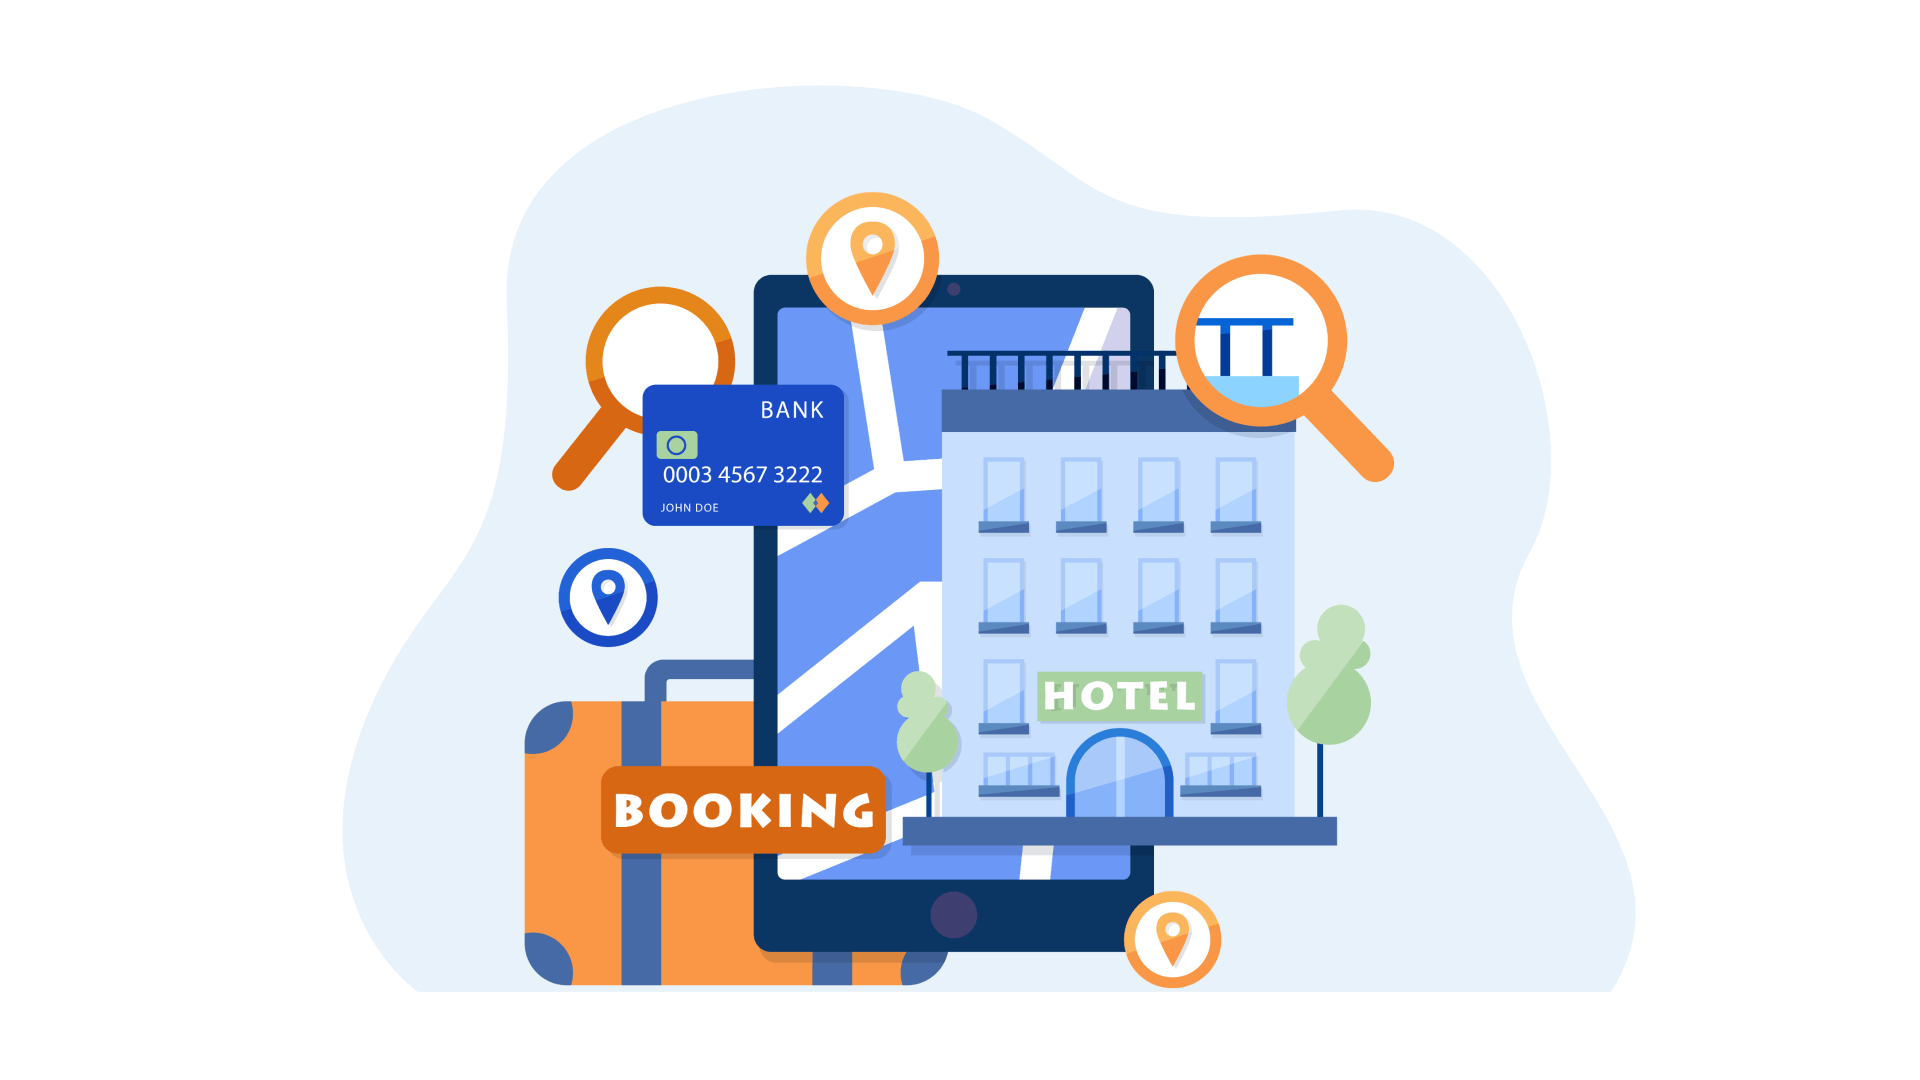 Check out hotel property management software market trends for the years to come.